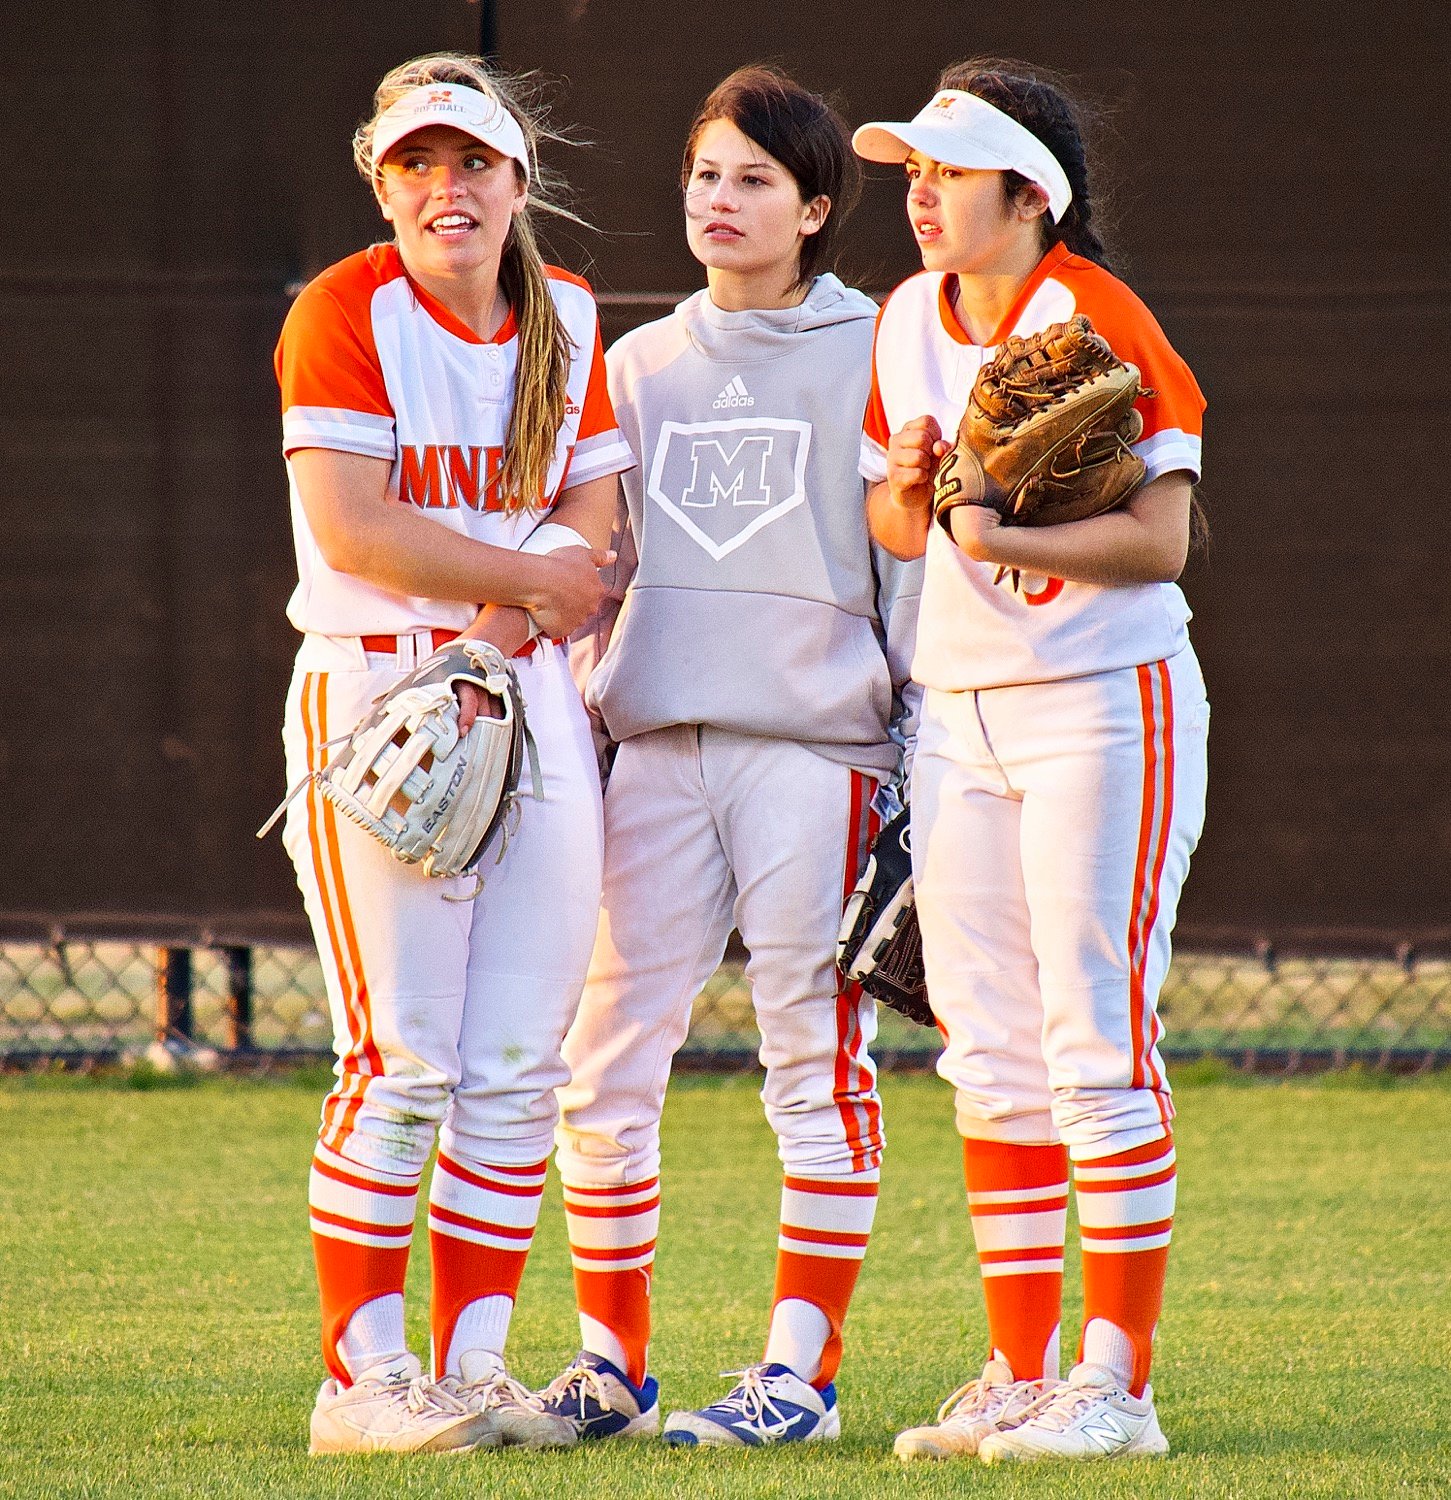 As the winds blew through and the temperature dropped, it was a struggle to stay warm in between the action. Here, senior outfielders Alyssa Lankford and Alana Galaz show signs of chilliness, while Kenleigh Aguirre is warmer in her pullover.  [more thrills, chills]